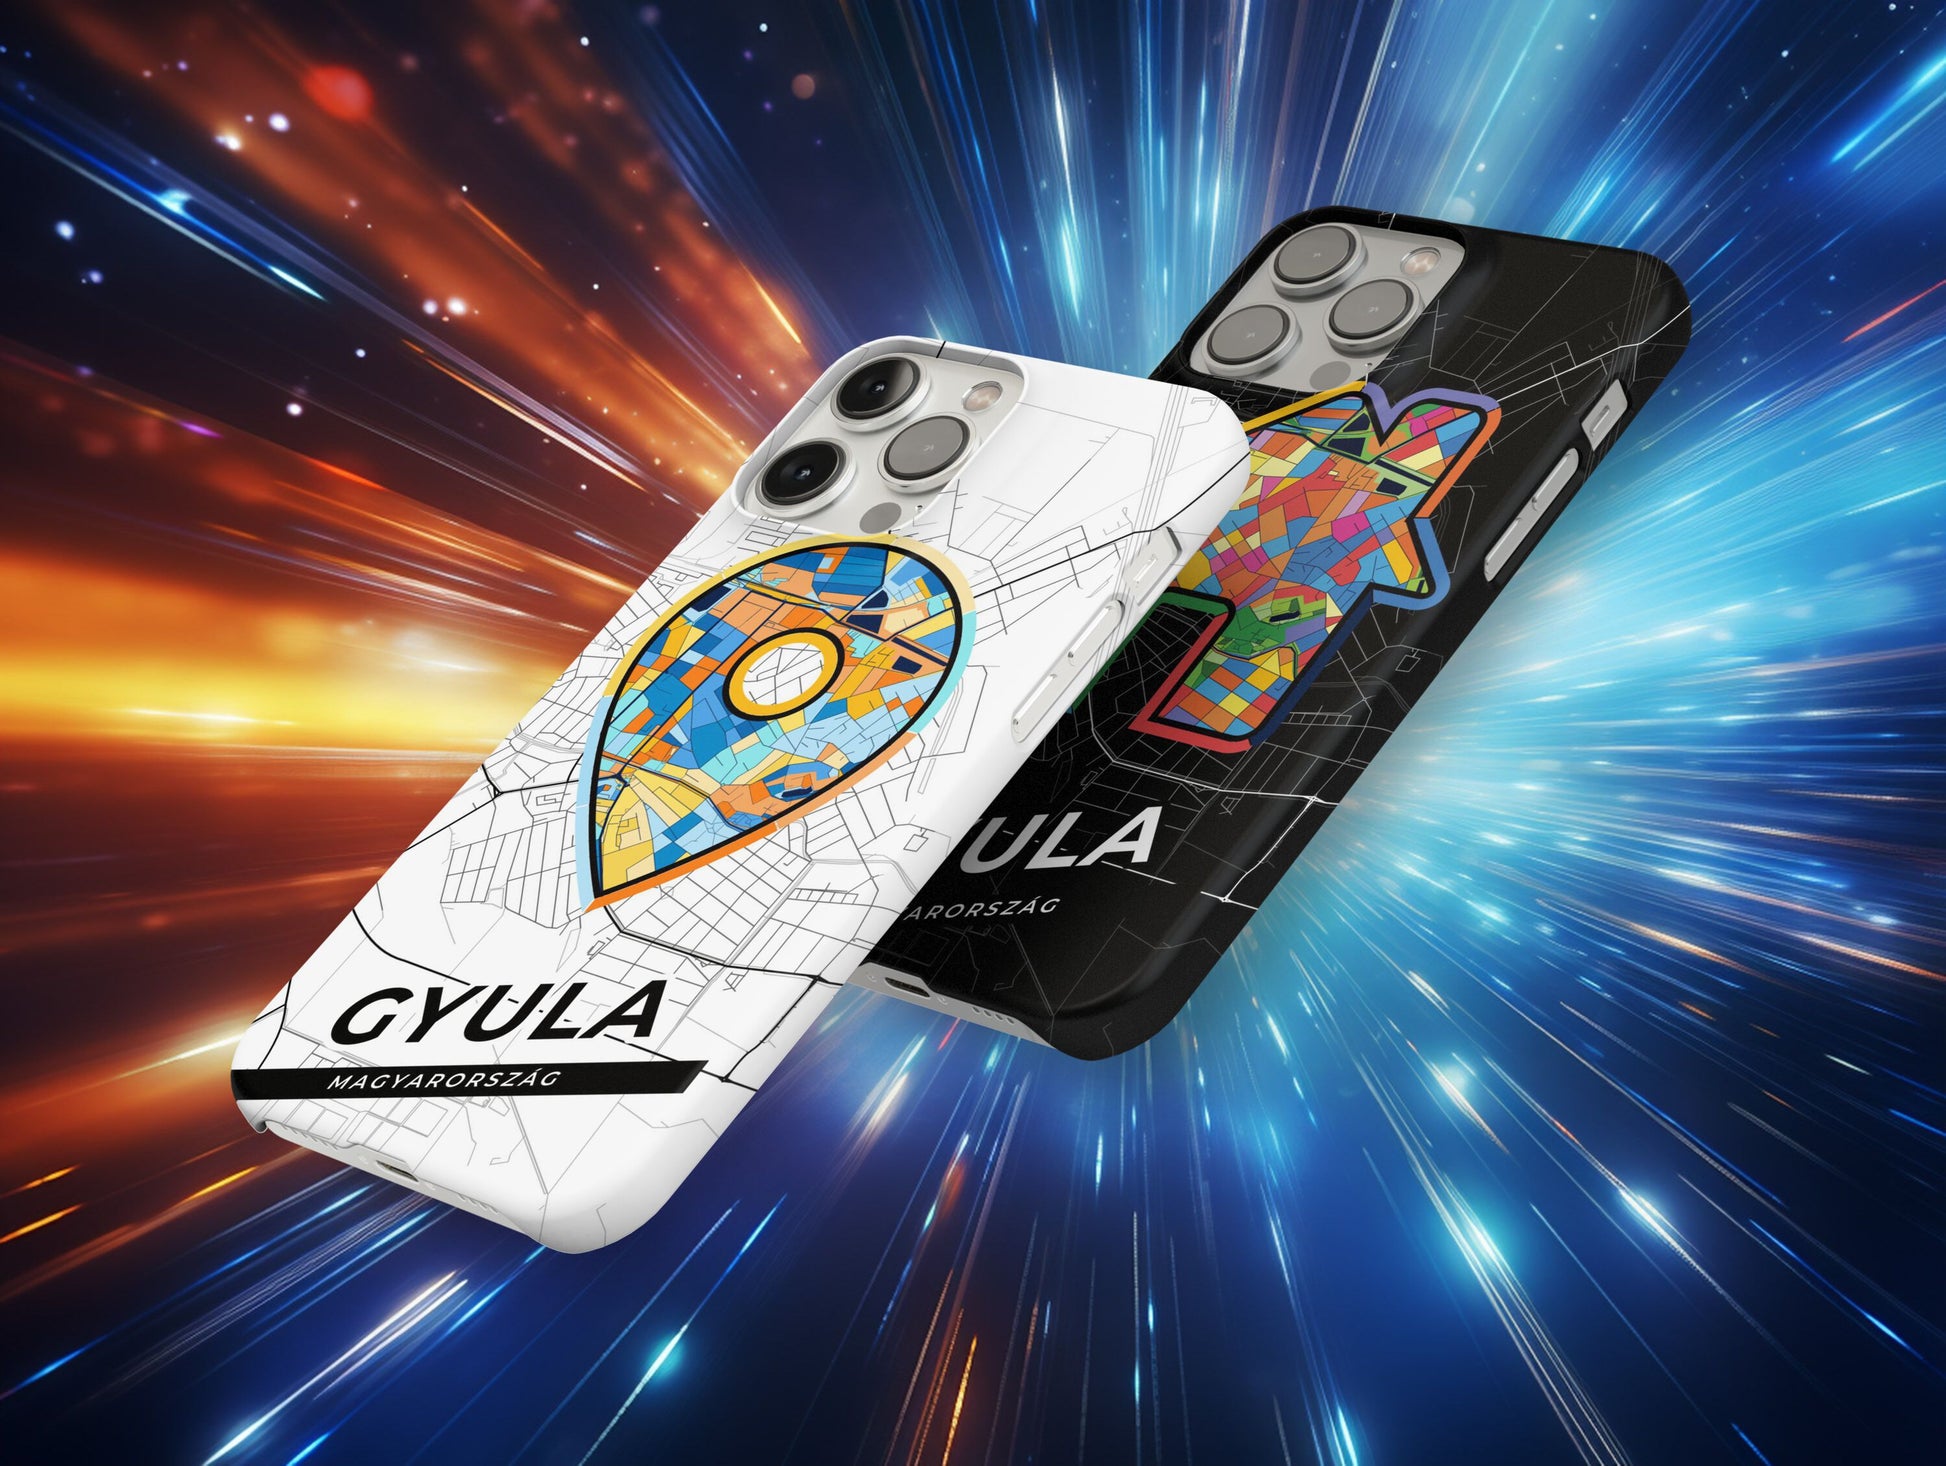 Gyula Hungary slim phone case with colorful icon. Birthday, wedding or housewarming gift. Couple match cases.